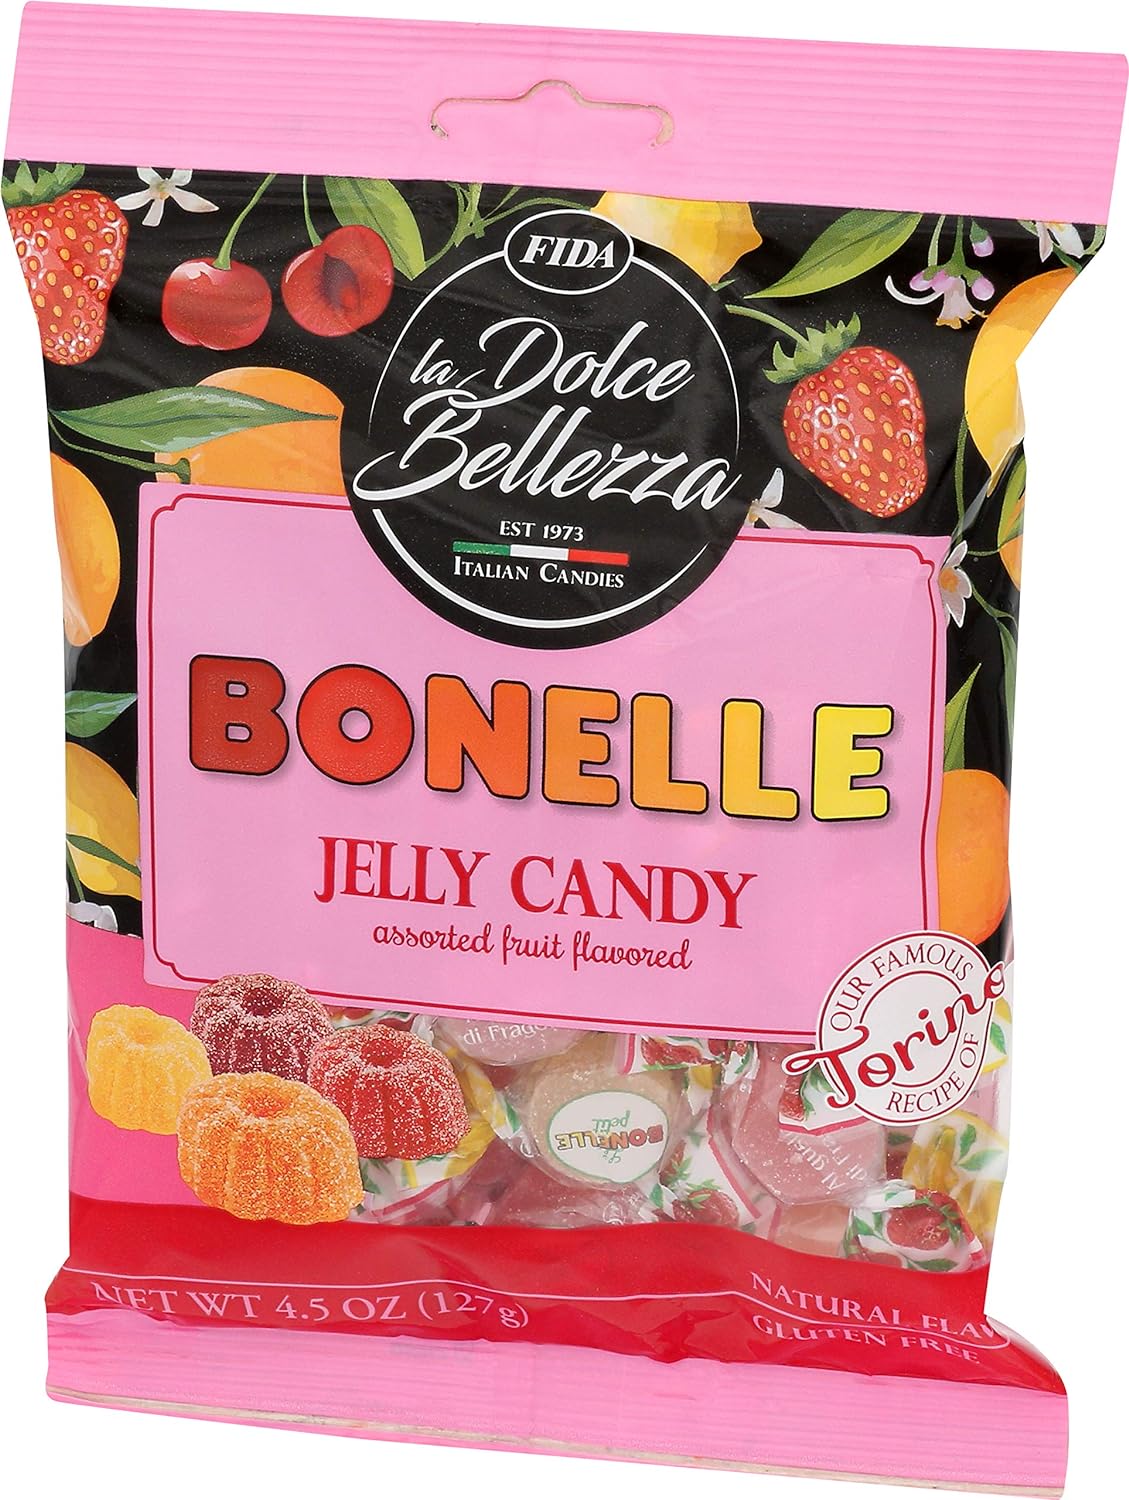 Fida - Bonelle Assorted Jelly Candy - Fruit Flavored - 4.5 oz, 18 oz Bag : Grocery & Gourmet Food